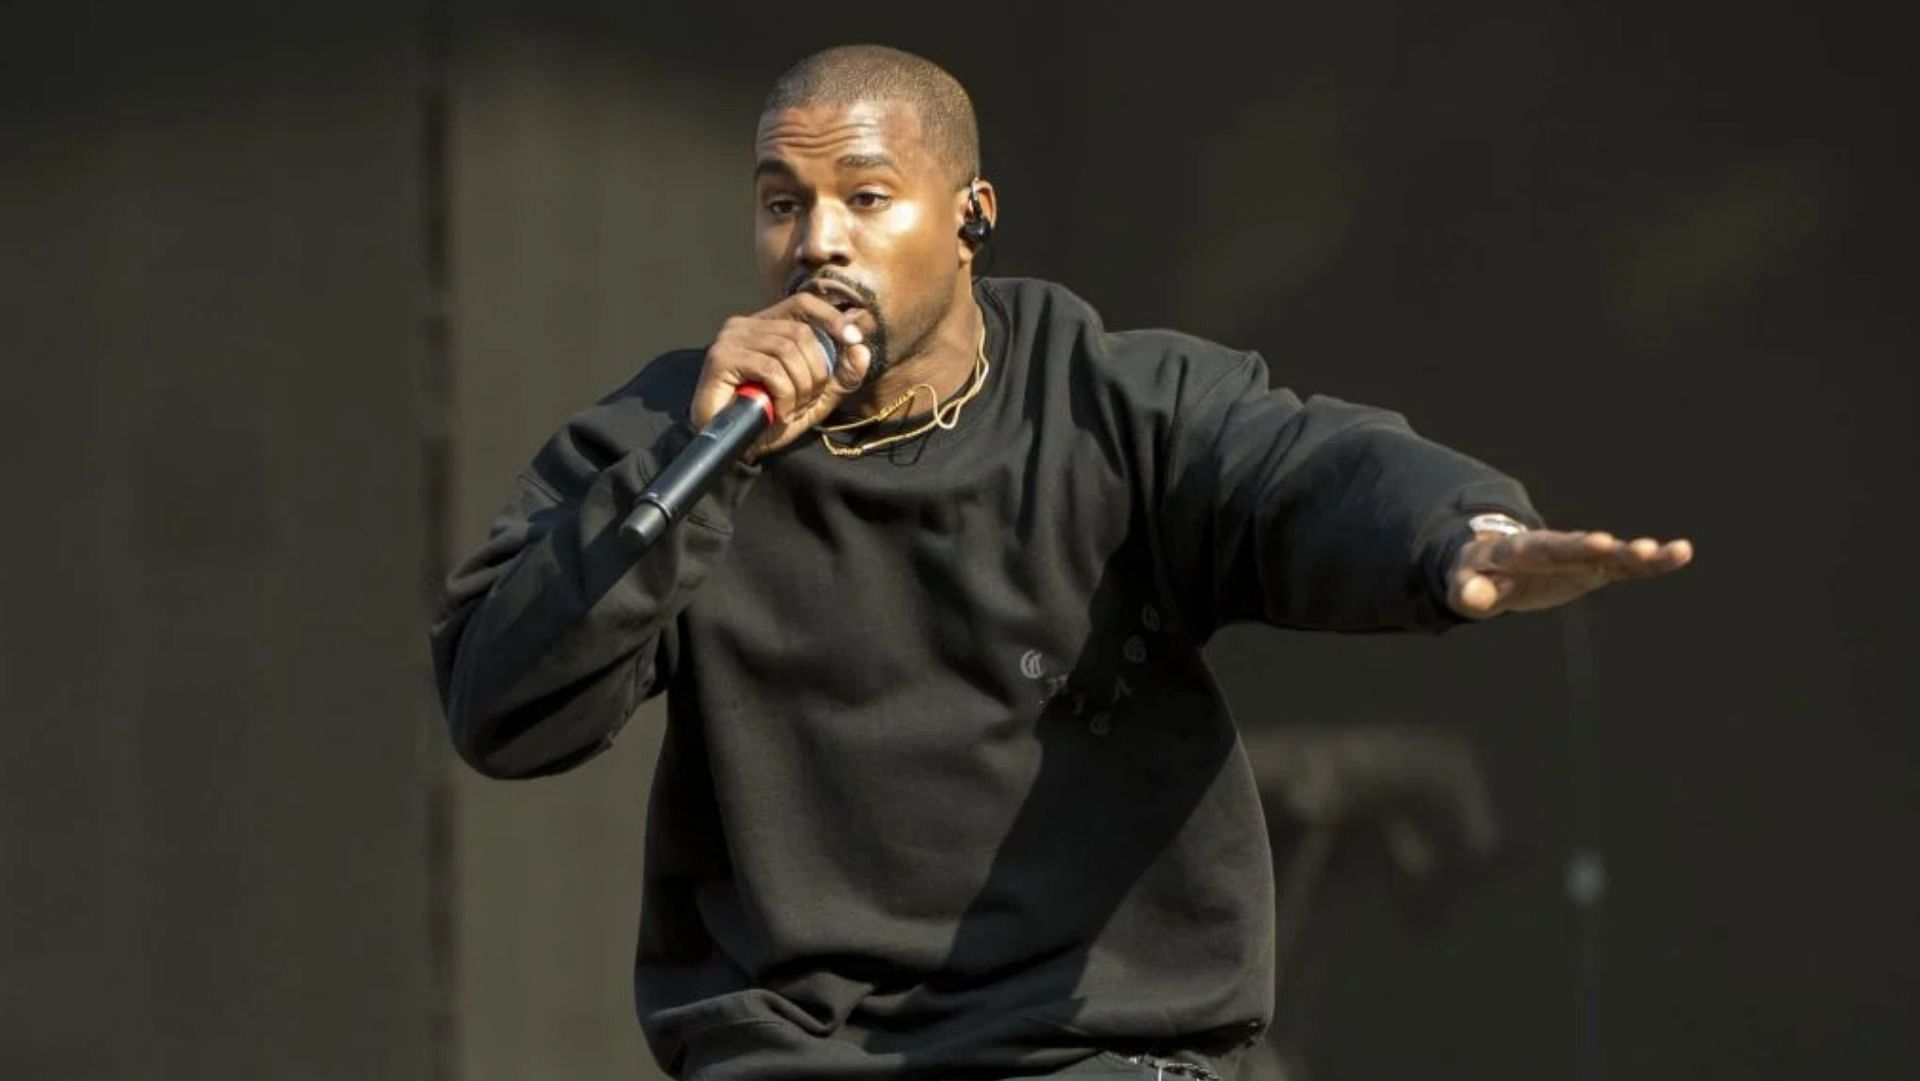 After weeks of his disappearance, Kanye West is rumored to appear at Ghana